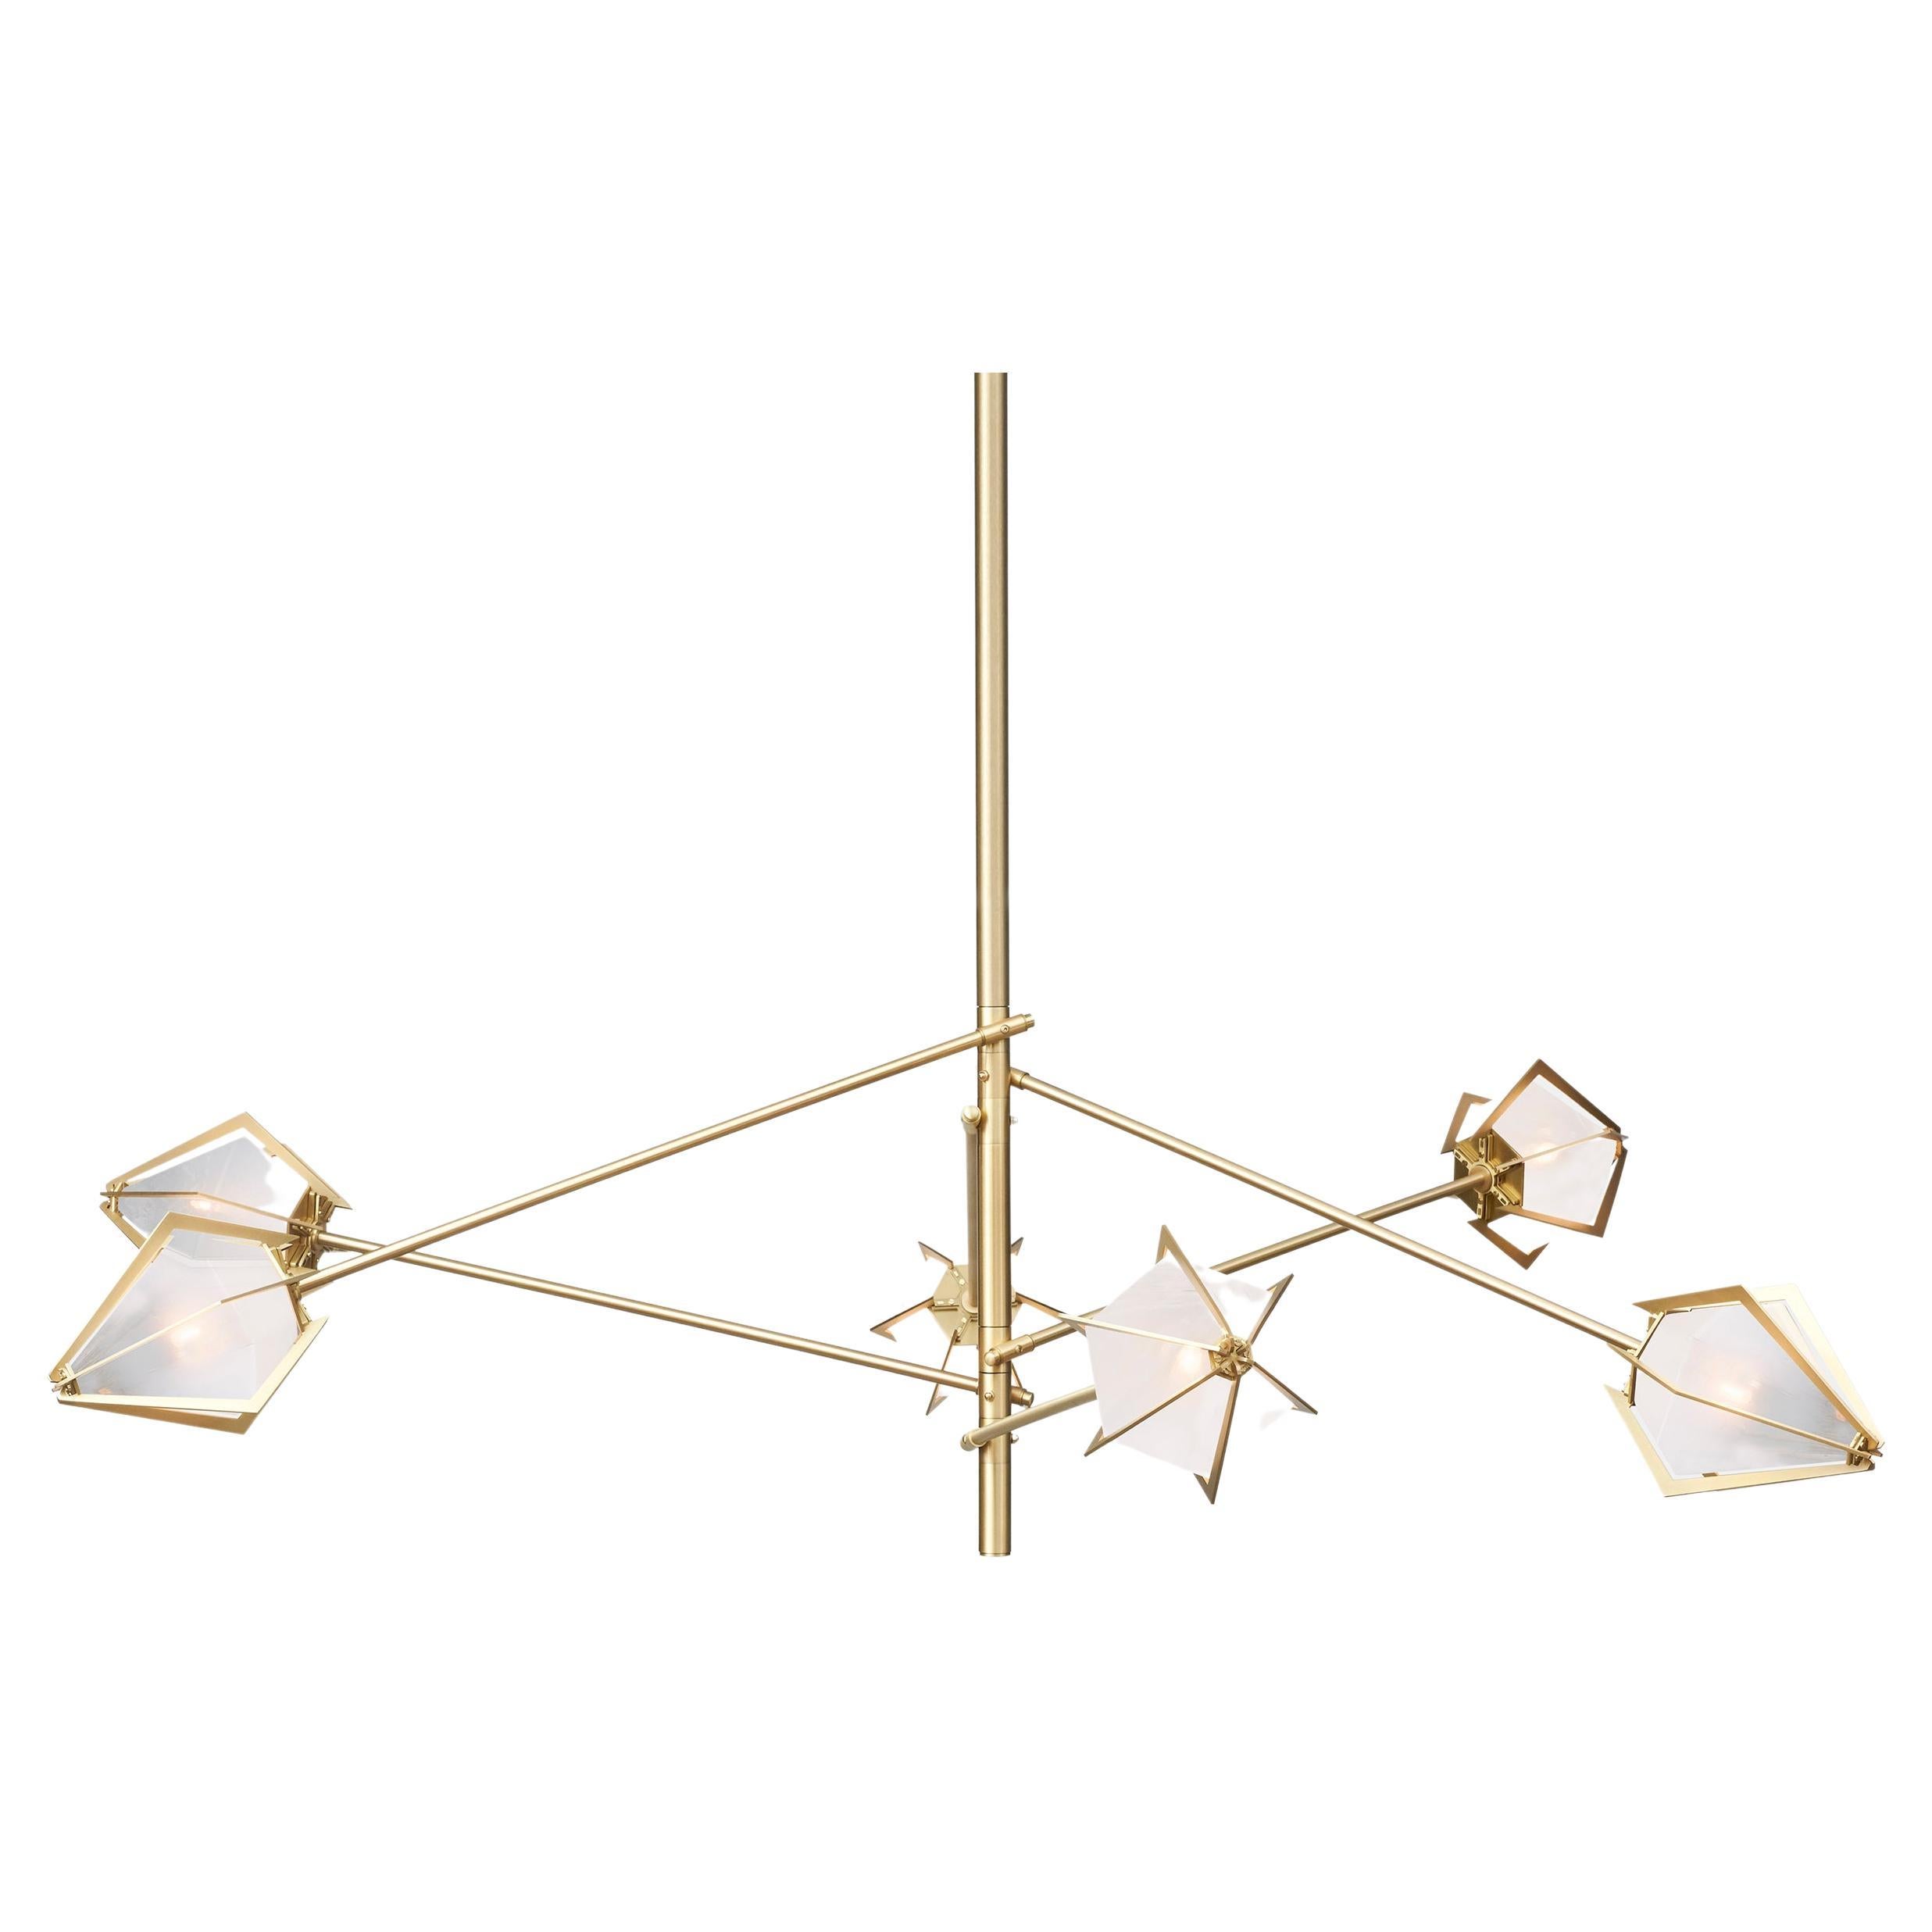 Harlow Spoke Chandelier Large in Satin Brass and Alabaster White Glass For Sale